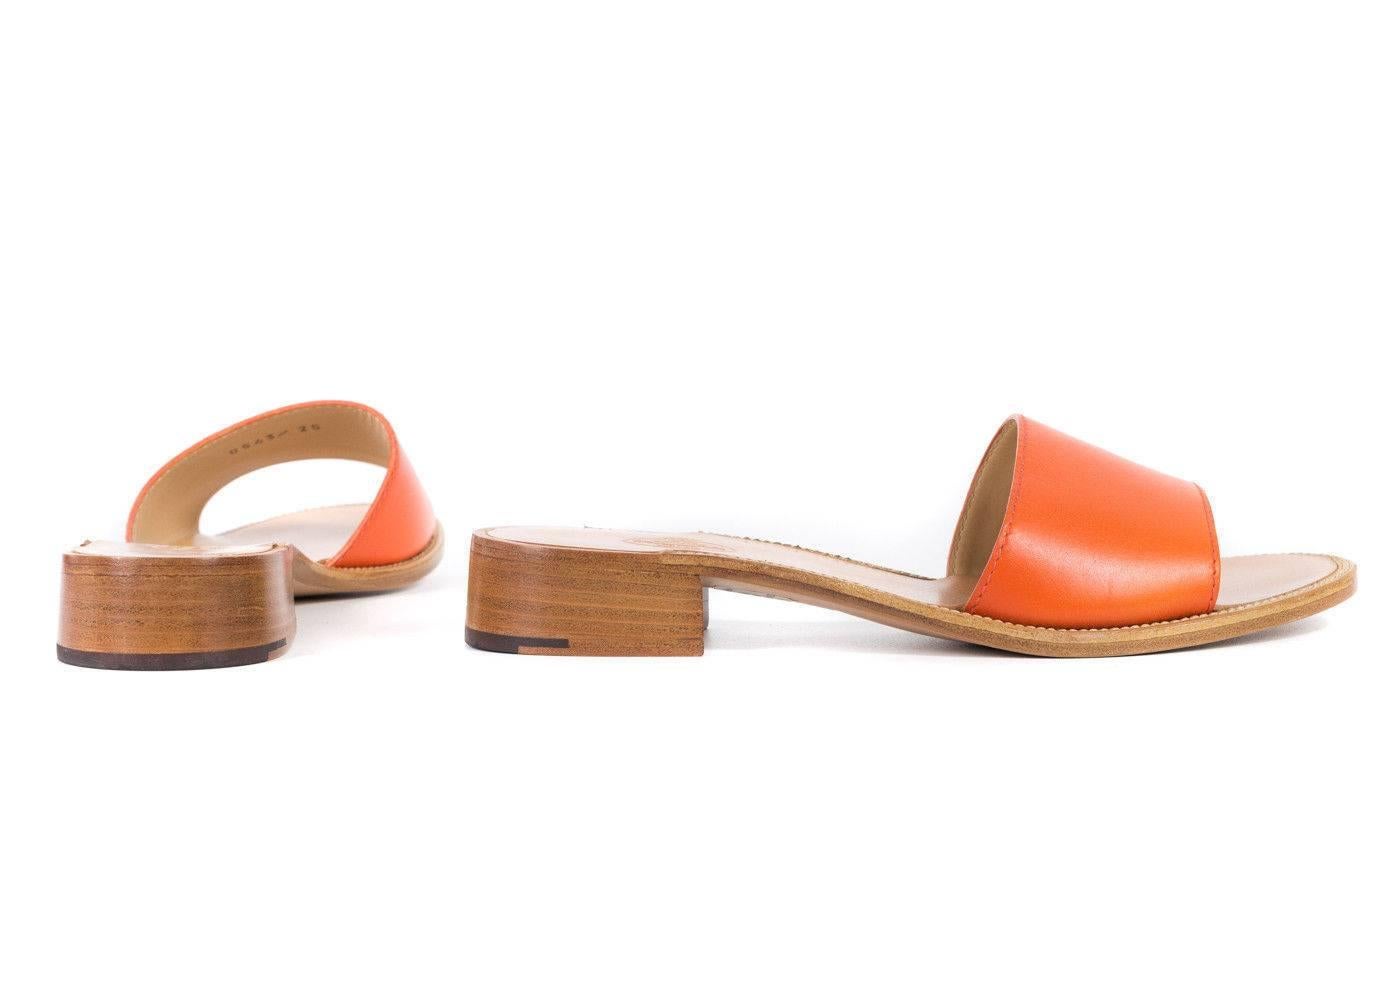 Church's innovative take on a pair of mules silhouette in a bright tangerine orange tone for this fall season. To up your fashion trend game, simply pair these gorgeous attractive mules with some fringed jeans or skinny jeans and a white blouse or